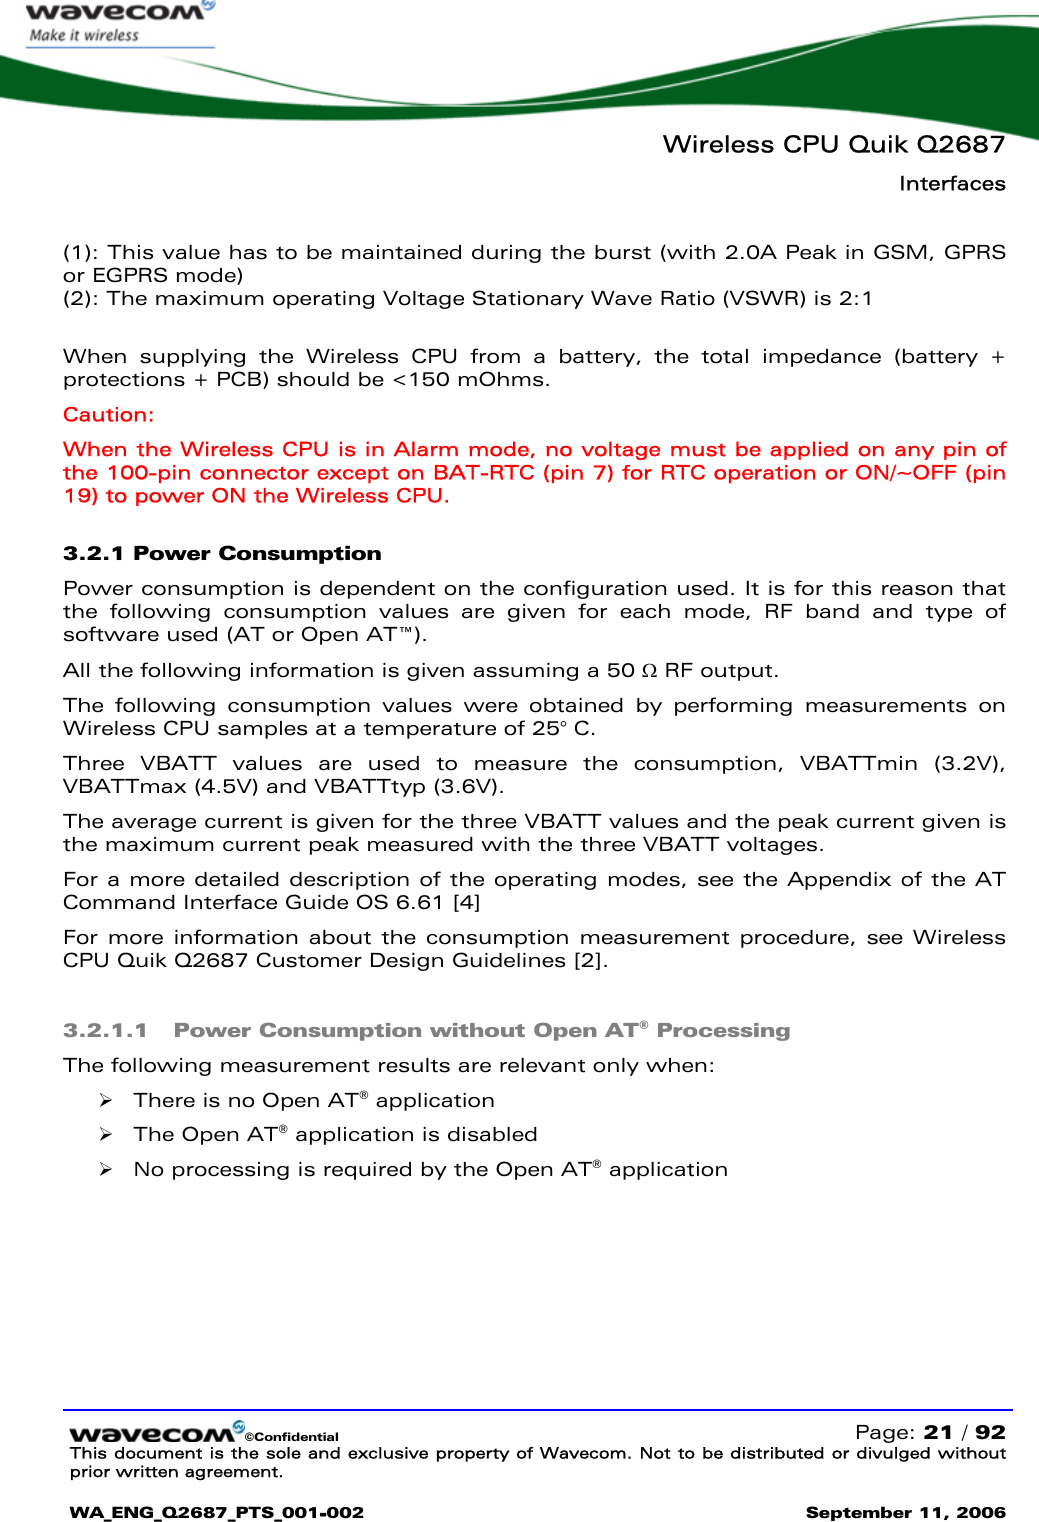   Wireless CPU Quik Q2687 Interfaces   ©Confidential   Page: 21 / 92 This document is the sole and exclusive property of Wavecom. Not to be distributed or divulged without prior written agreement.  WA_ENG_Q2687_PTS_001-002 September 11, 2006    (1): This value has to be maintained during the burst (with 2.0A Peak in GSM, GPRS or EGPRS mode) (2): The maximum operating Voltage Stationary Wave Ratio (VSWR) is 2:1  When supplying the Wireless CPU from a battery, the total impedance (battery + protections + PCB) should be &lt;150 mOhms. Caution: When the Wireless CPU is in Alarm mode, no voltage must be applied on any pin of the 100-pin connector except on BAT-RTC (pin 7) for RTC operation or ON/~OFF (pin 19) to power ON the Wireless CPU. 3.2.1 Power Consumption Power consumption is dependent on the configuration used. It is for this reason that the following consumption values are given for each mode, RF band and type of software used (AT or Open AT™). All the following information is given assuming a 50 Ω RF output. The following consumption values were obtained by performing measurements on Wireless CPU samples at a temperature of 25° C. Three VBATT values are used to measure the consumption, VBATTmin (3.2V), VBATTmax (4.5V) and VBATTtyp (3.6V).  The average current is given for the three VBATT values and the peak current given is the maximum current peak measured with the three VBATT voltages. For a more detailed description of the operating modes, see the Appendix of the AT Command Interface Guide OS 6.61 [4] For more information about the consumption measurement procedure, see Wireless CPU Quik Q2687 Customer Design Guidelines [2]. 3.2.1.1 Power Consumption without Open AT® Processing The following measurement results are relevant only when: ¾ There is no Open AT® application  ¾ The Open AT® application is disabled ¾ No processing is required by the Open AT® application  